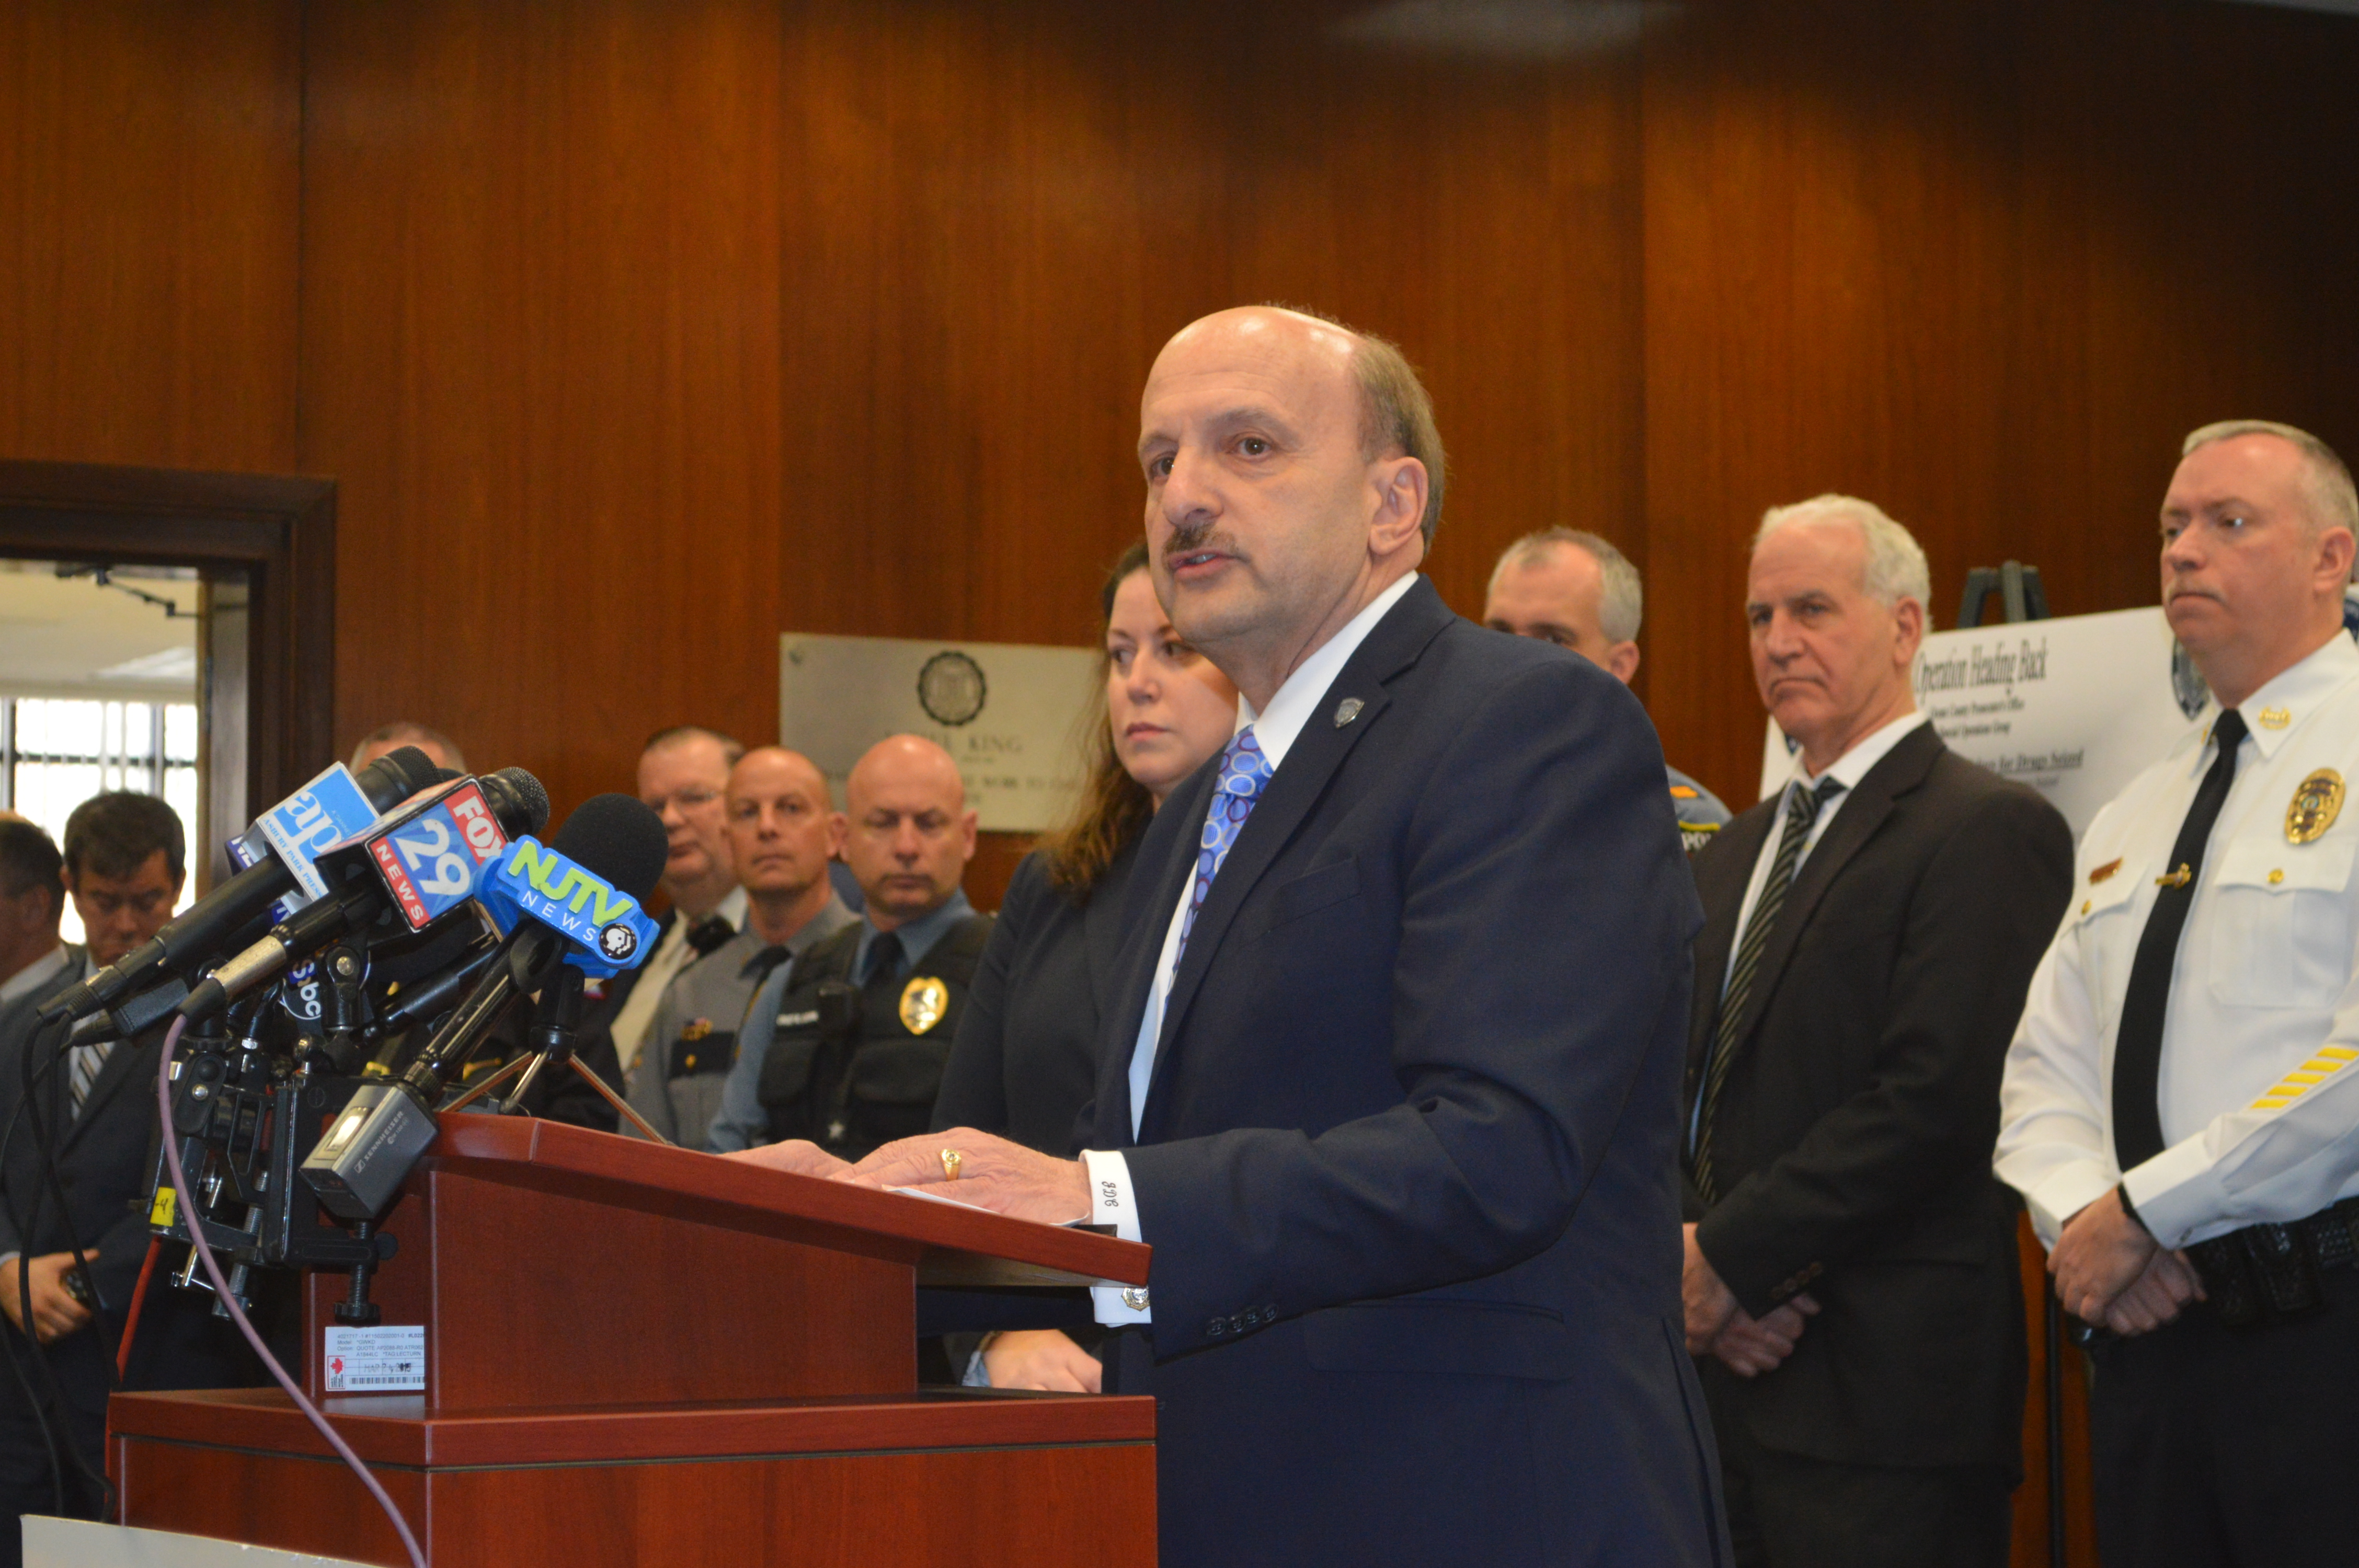 Ocean County Prosecutor Joseph Coronato announces charges in the largest drug bust in county history, March 9, 2018. (Photo: Daniel Nee)